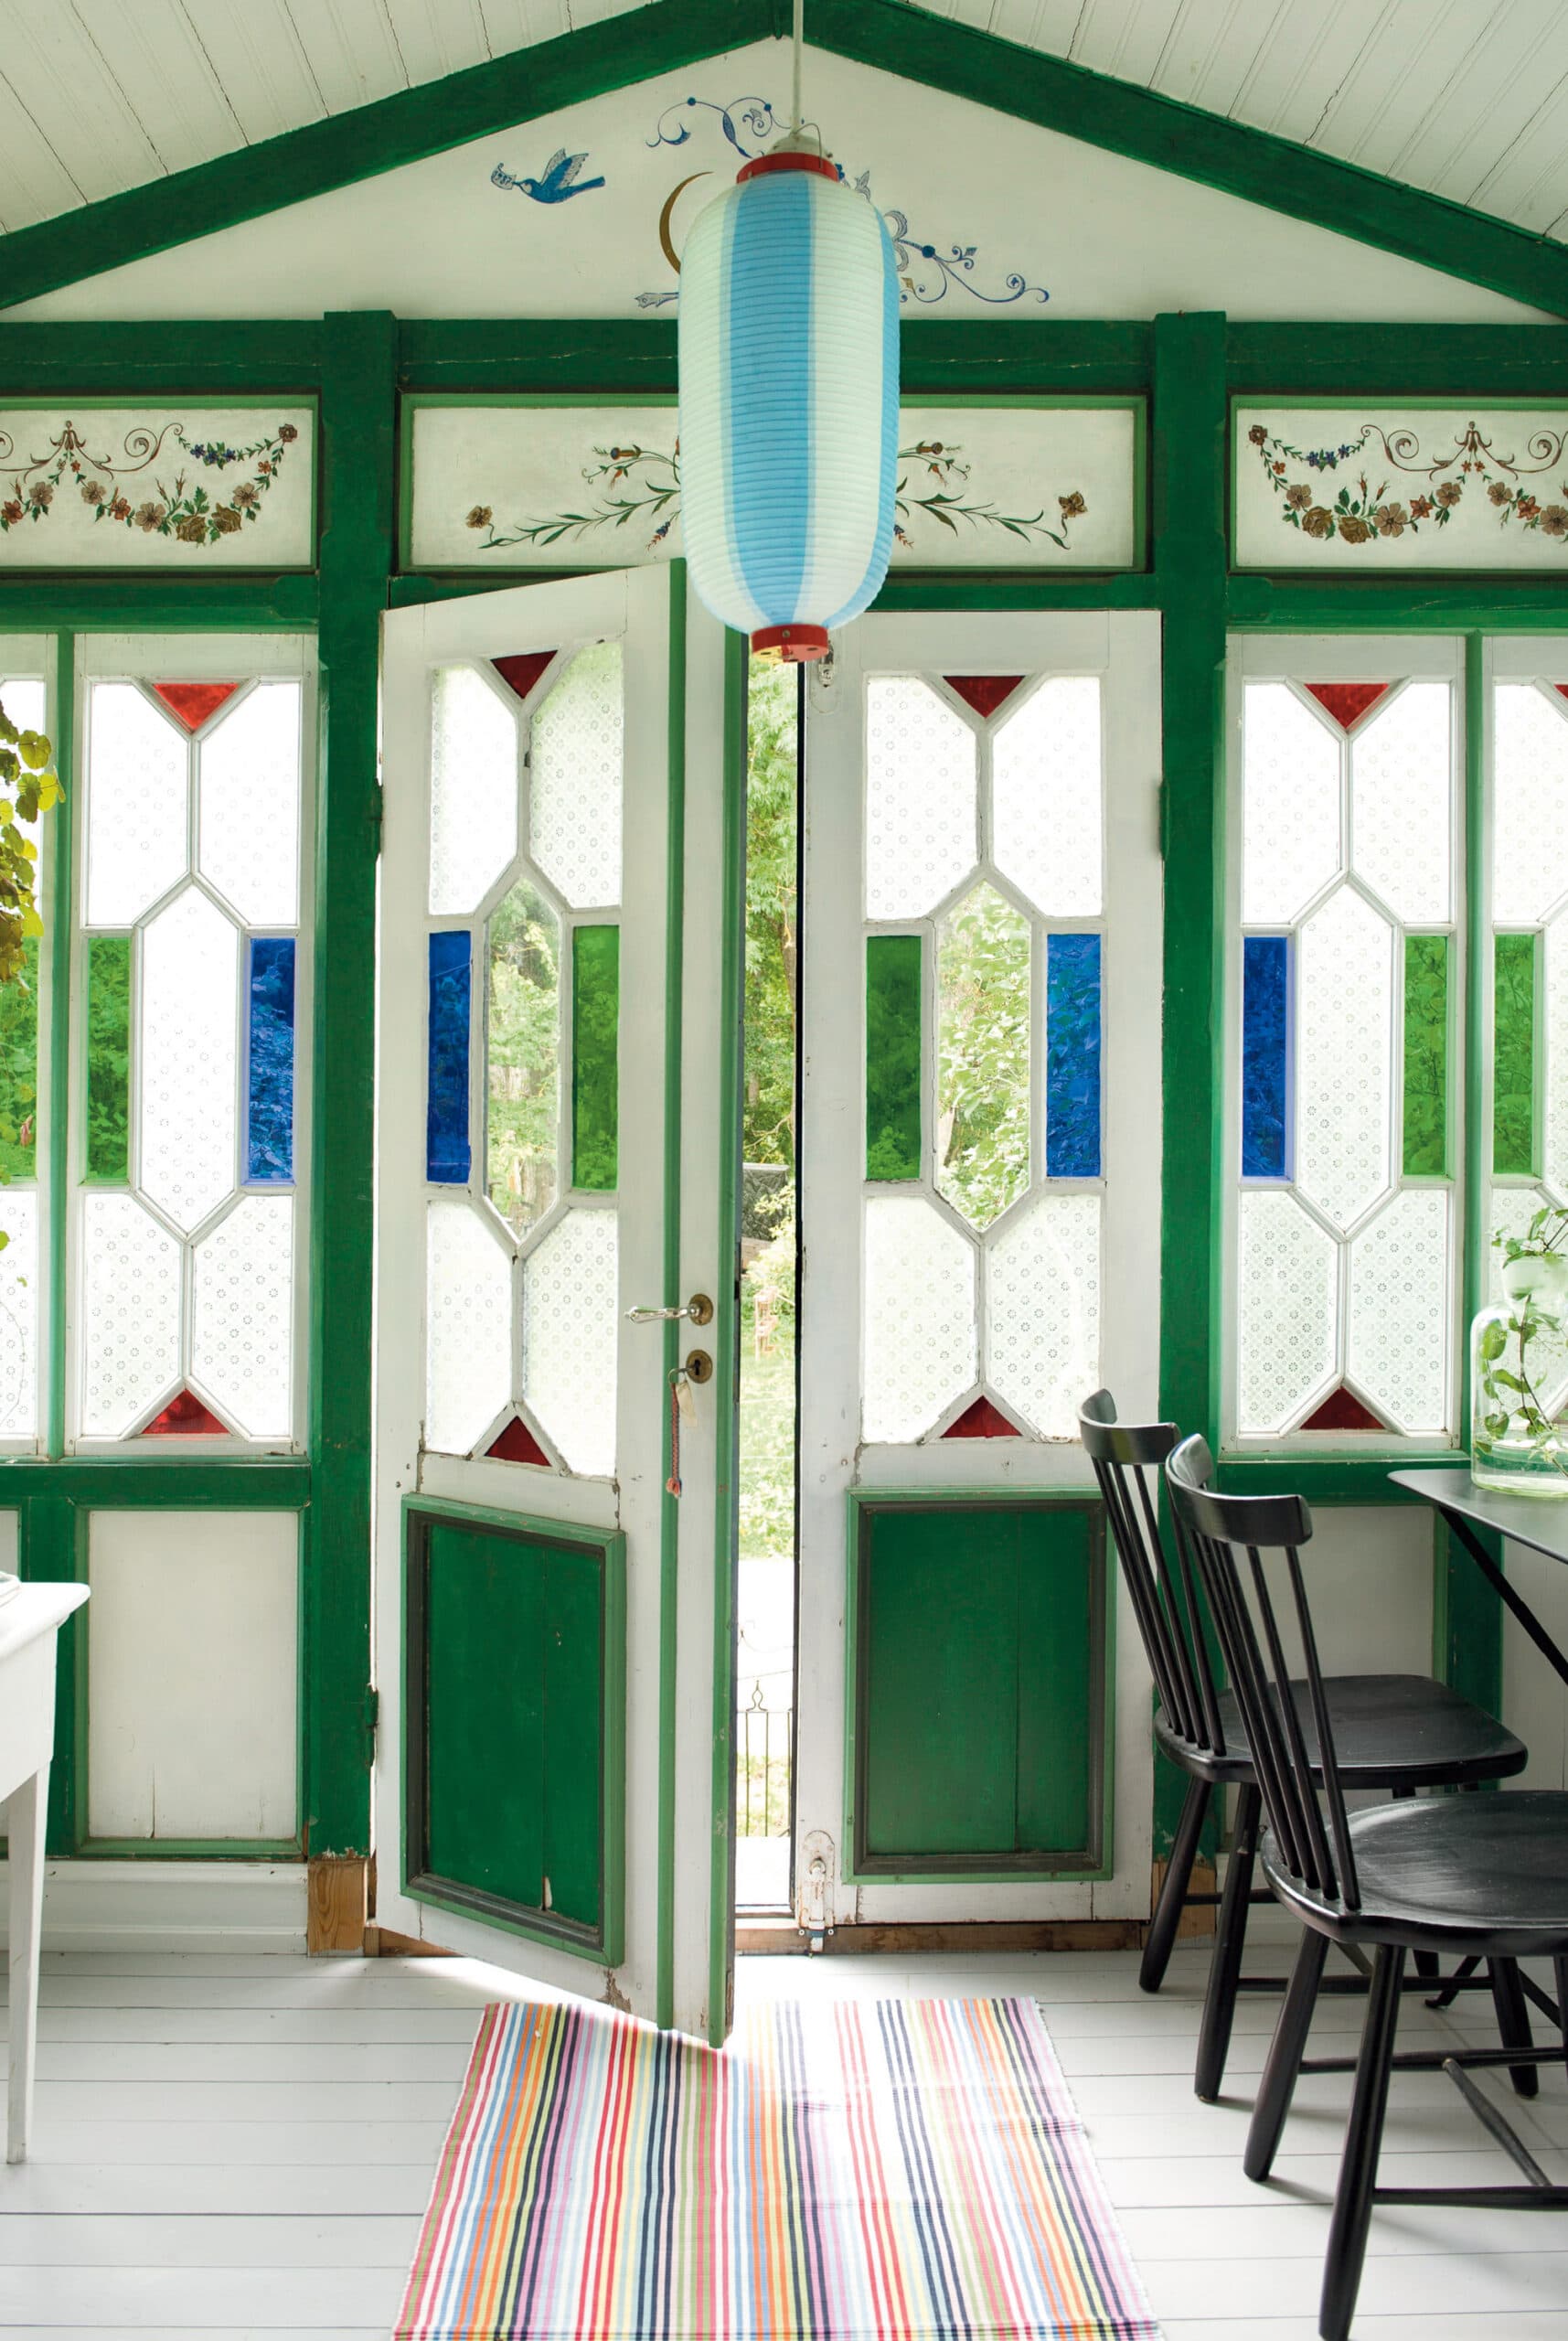 https://fredericmagazine.com/wp-content/uploads/2023/05/FREDERIC_V7_BRING-IT-BACK_STAINED-GLASS_Glasdoor-rt-scaled.jpg